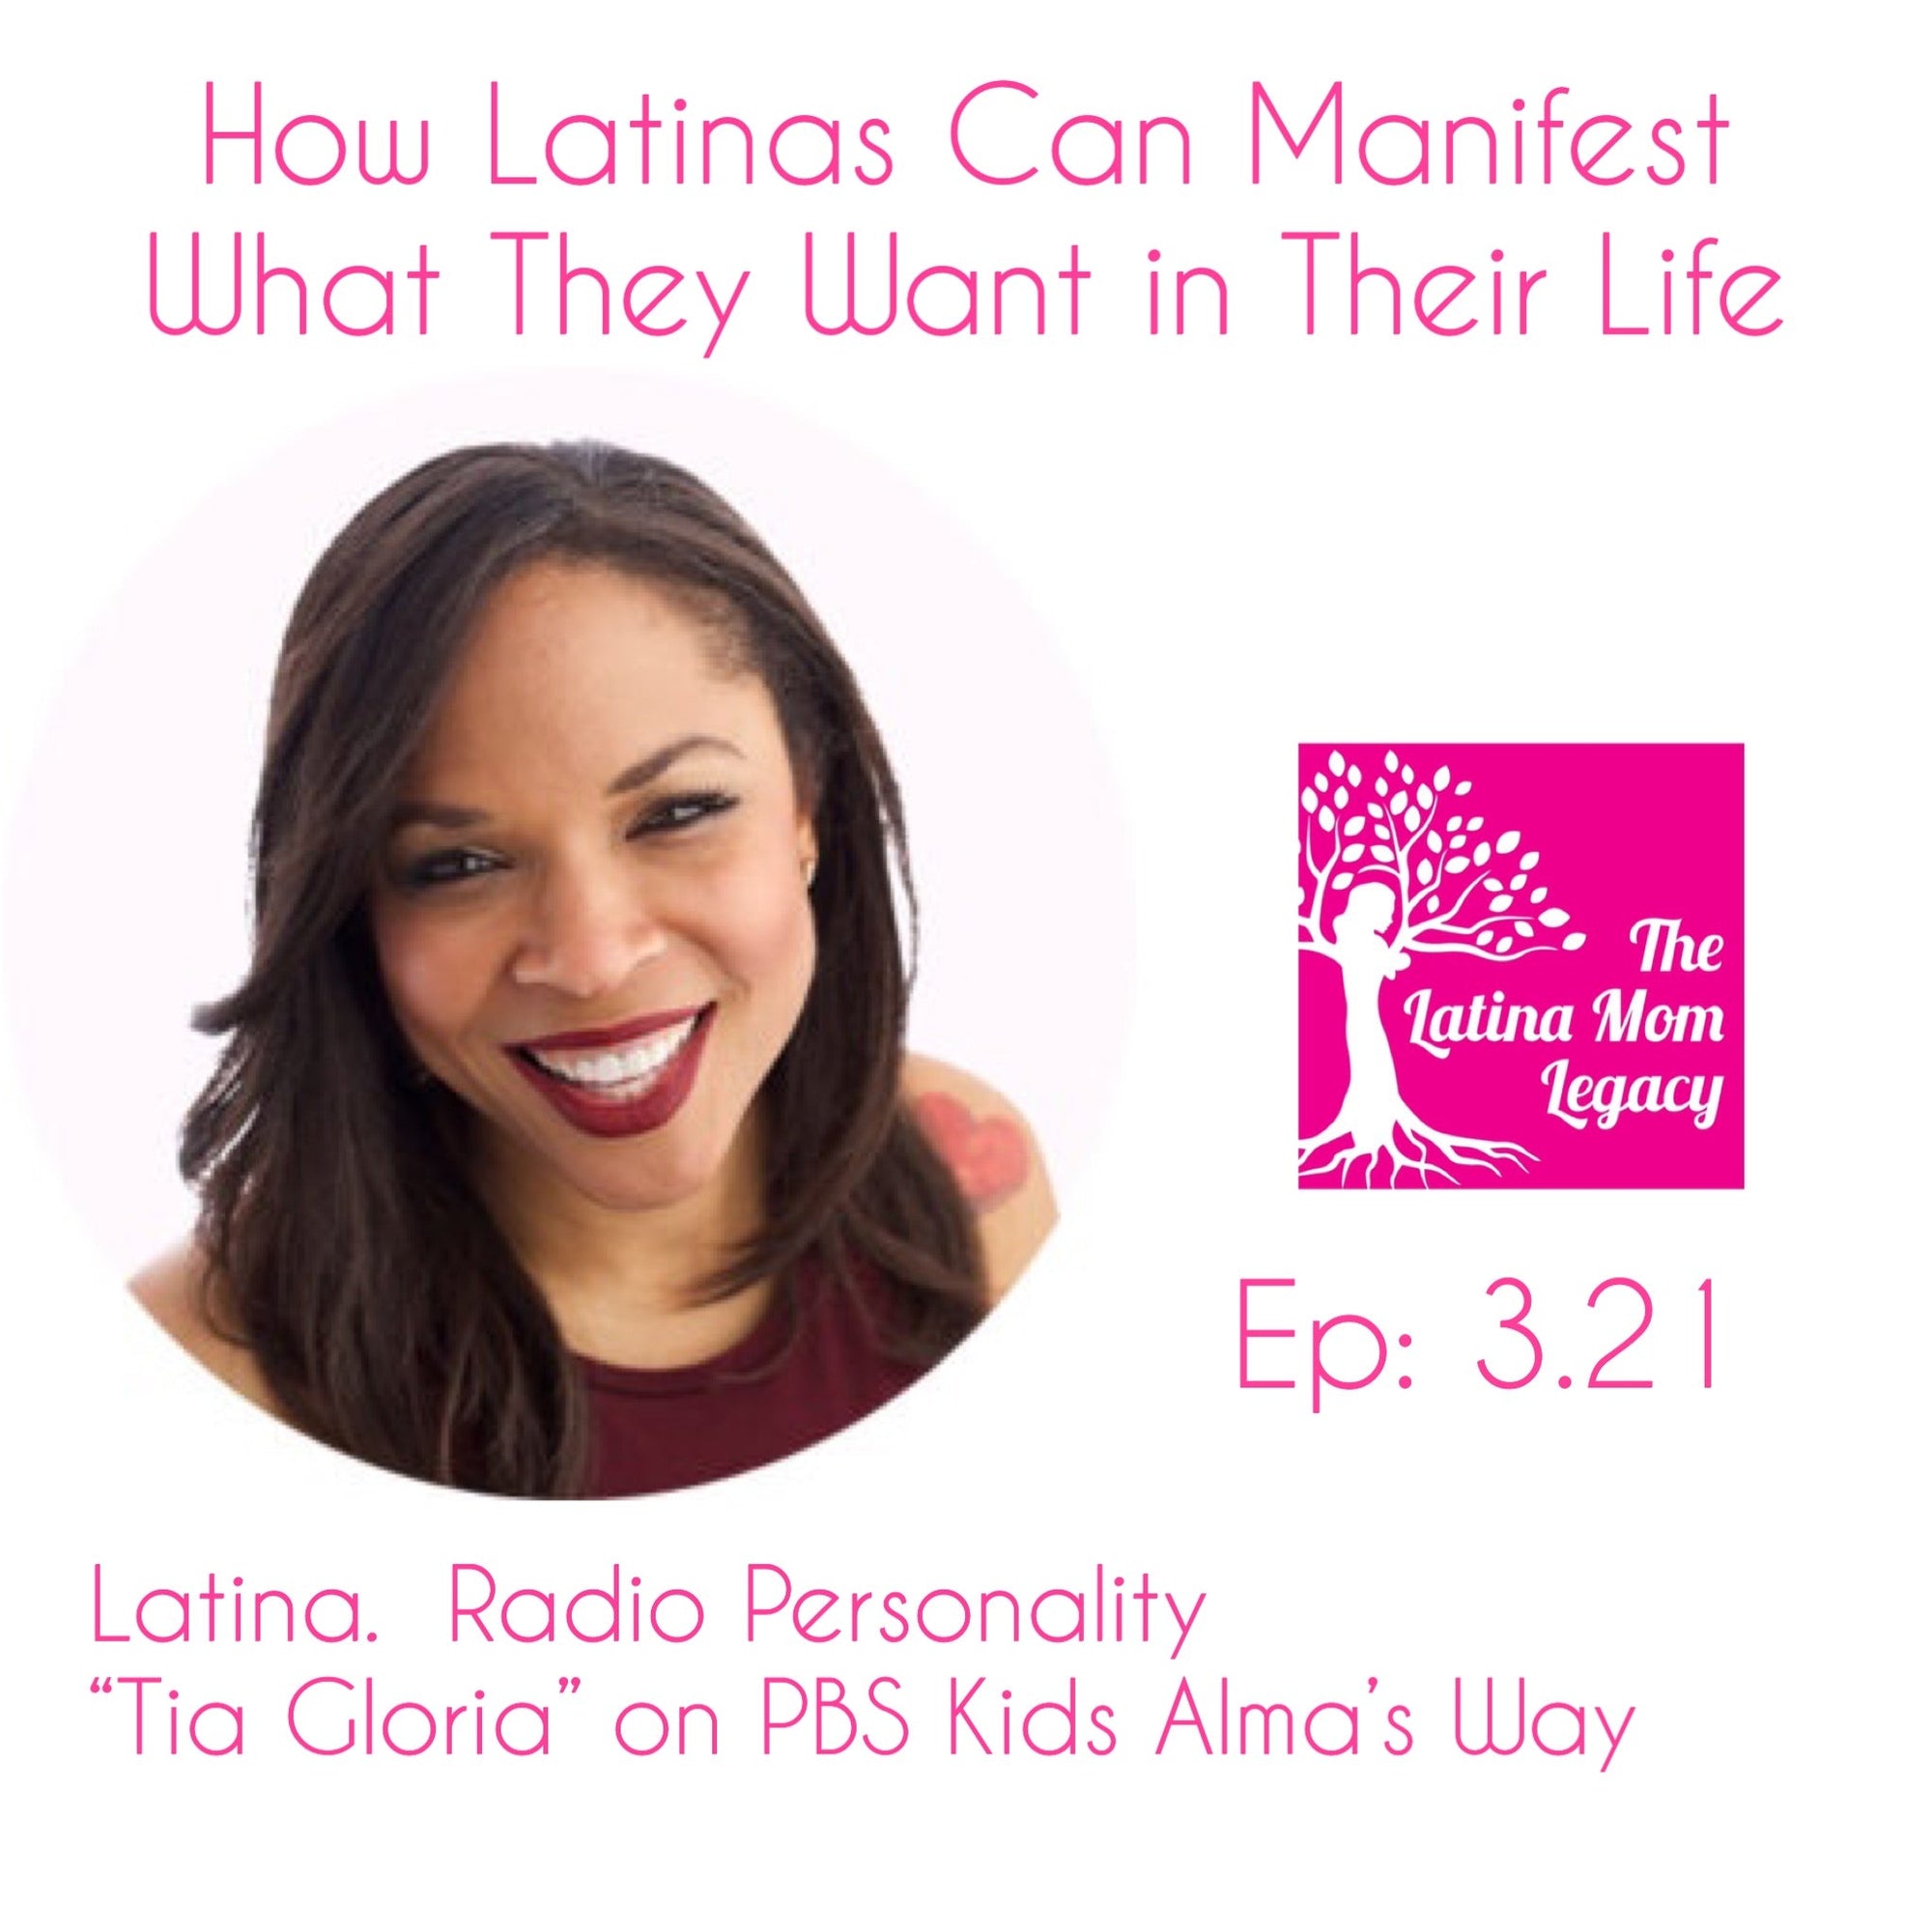 3.21 Sharon La Loca Montero - How Latinas Can Manifest What They Want In Their Life - Mi LegaSi